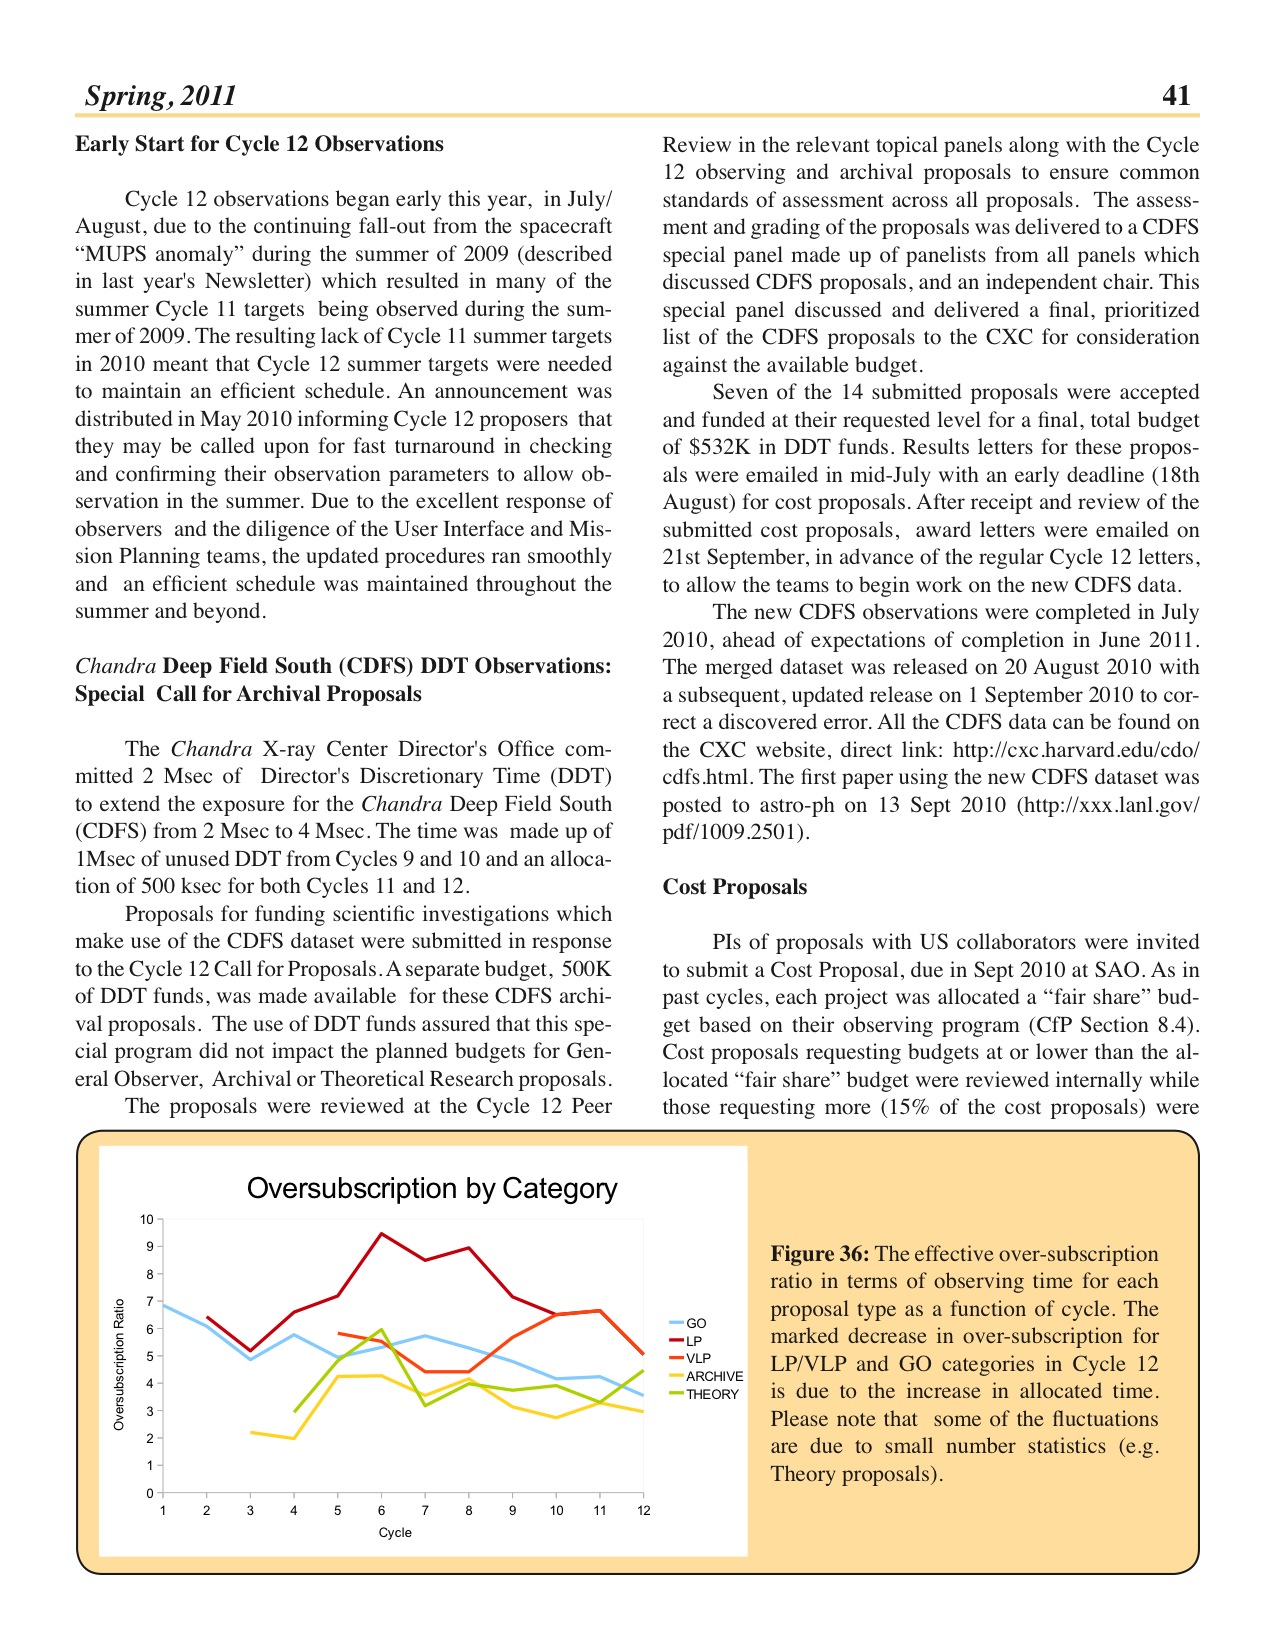 Page 41 of the Chandra Newsletter, issue 18.